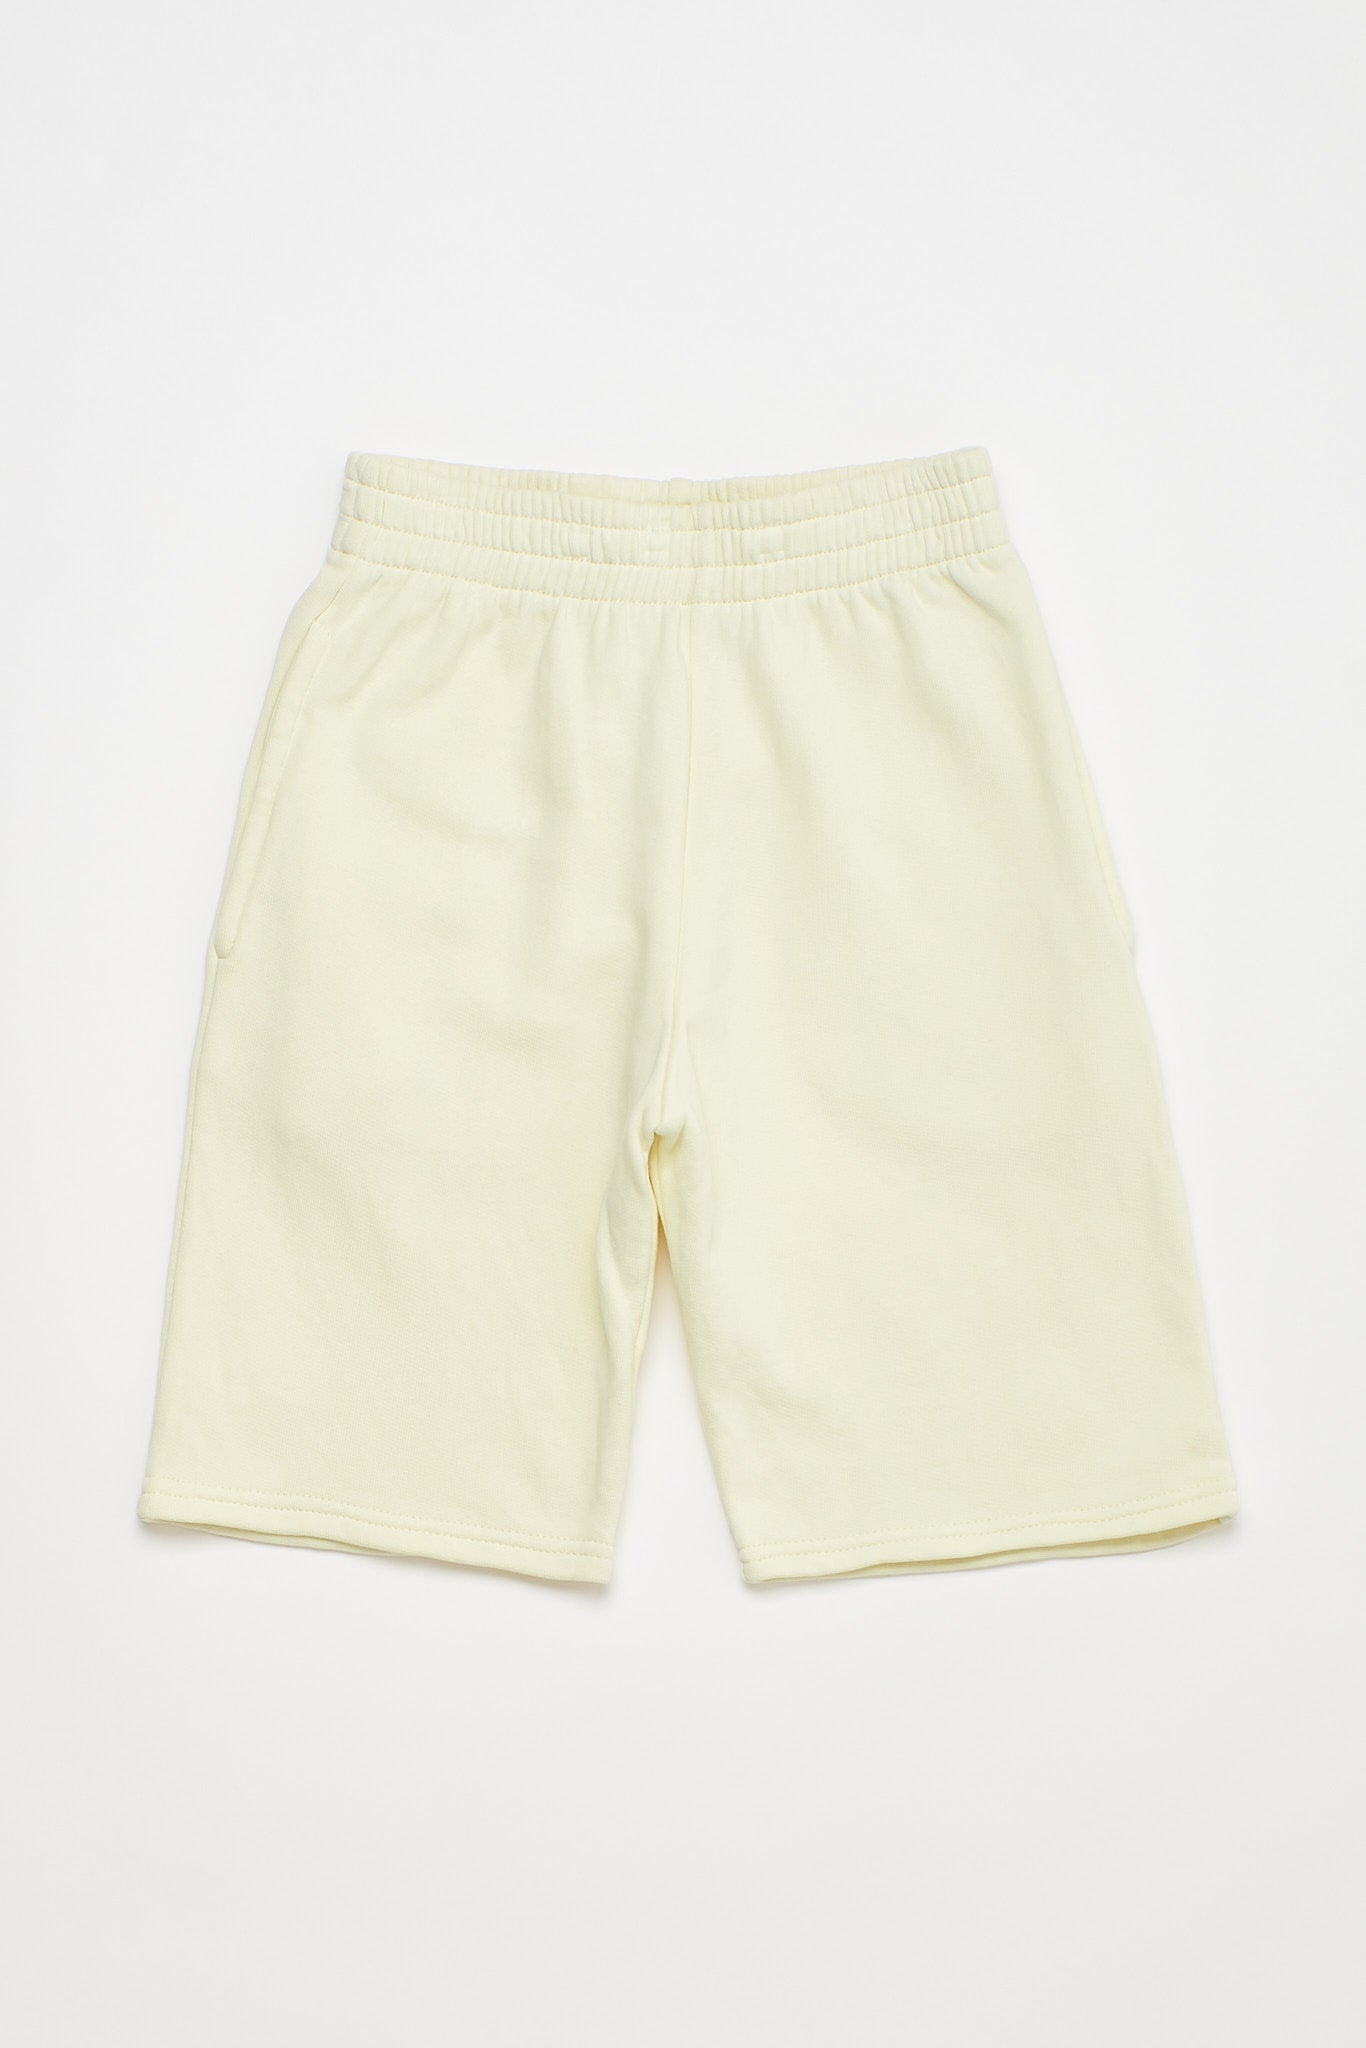 Rooster Shorts Cloudy White Shorts Maison Mangostan 